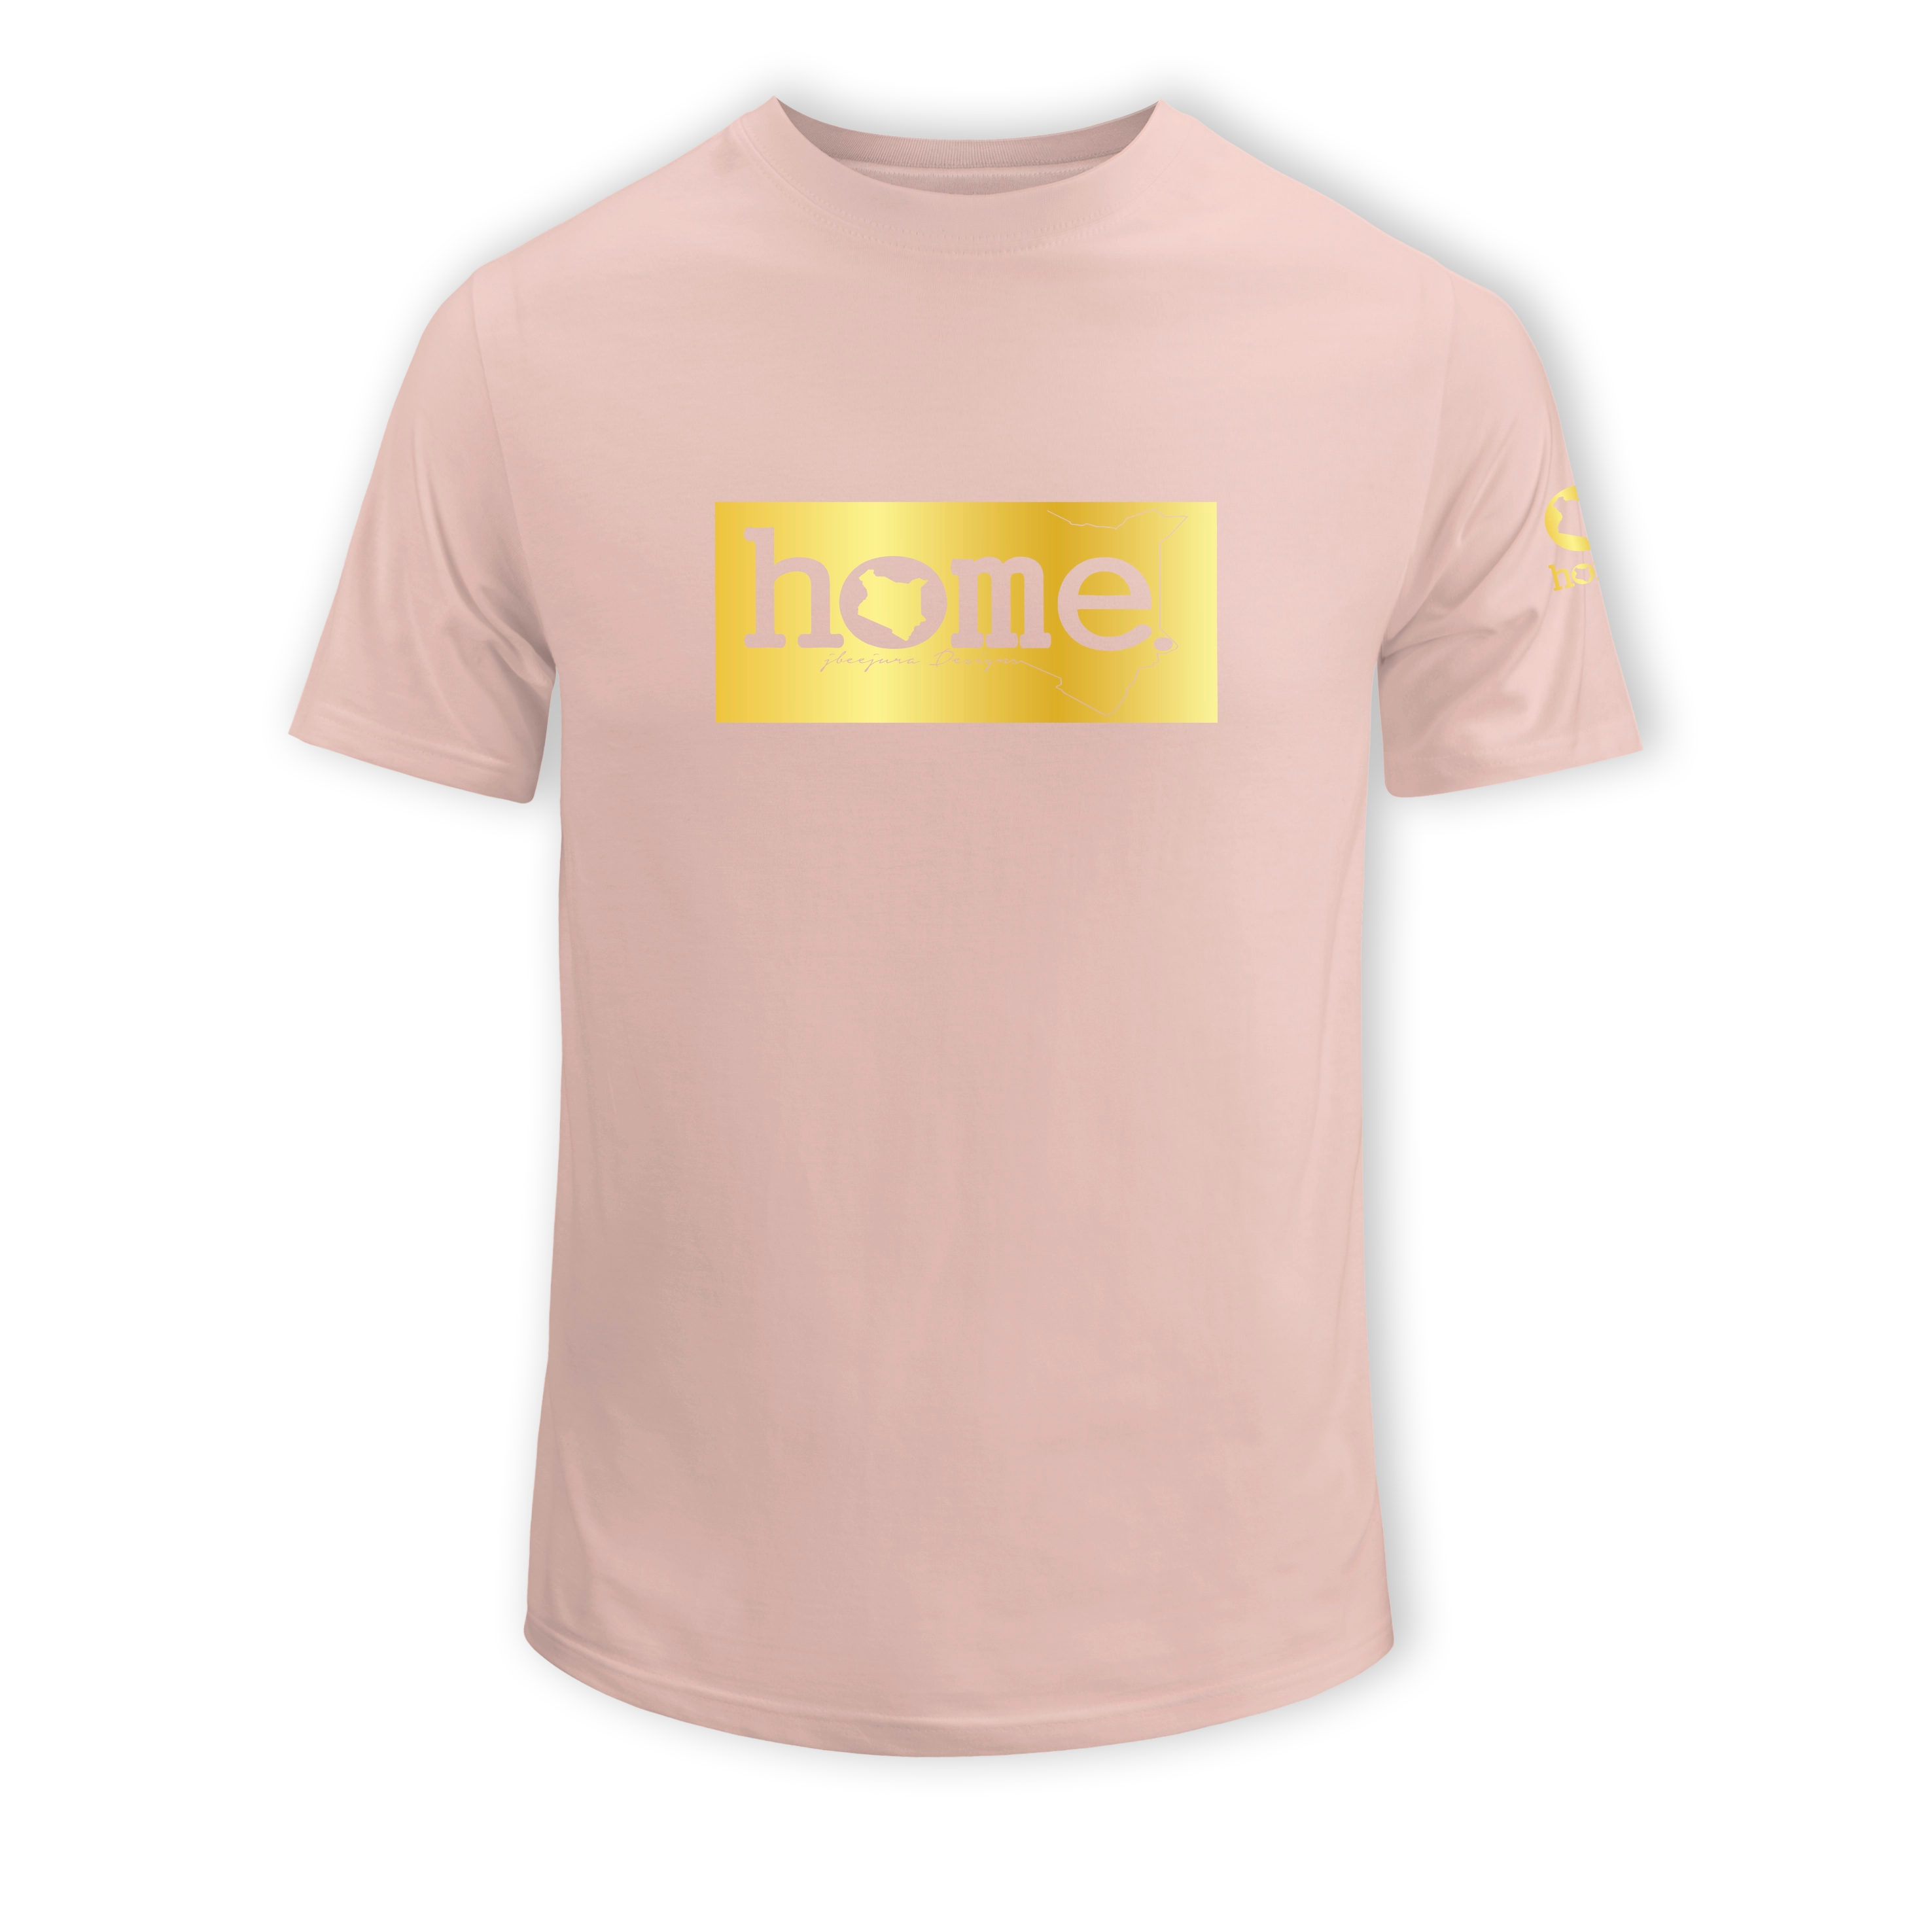 home_254 KIDS SHORT-SLEEVED PEACH T-SHIRT WITH A GOLD CLASSIC PRINT – COTTON PLUS FABRIC